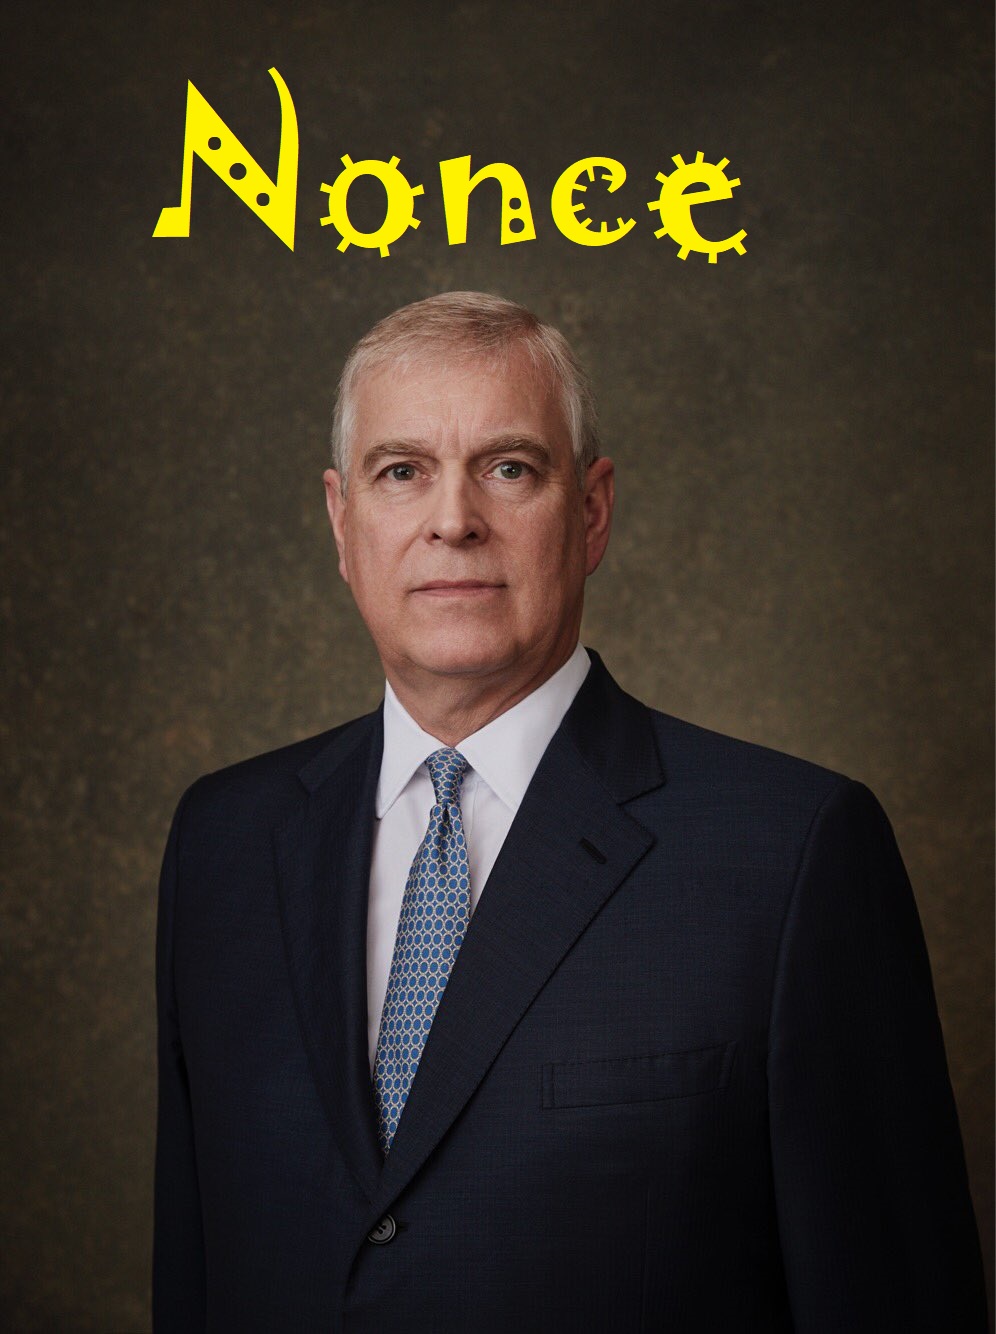 Happy birthday Prince Andrew! Wishing you another unforgettable luncheon. 